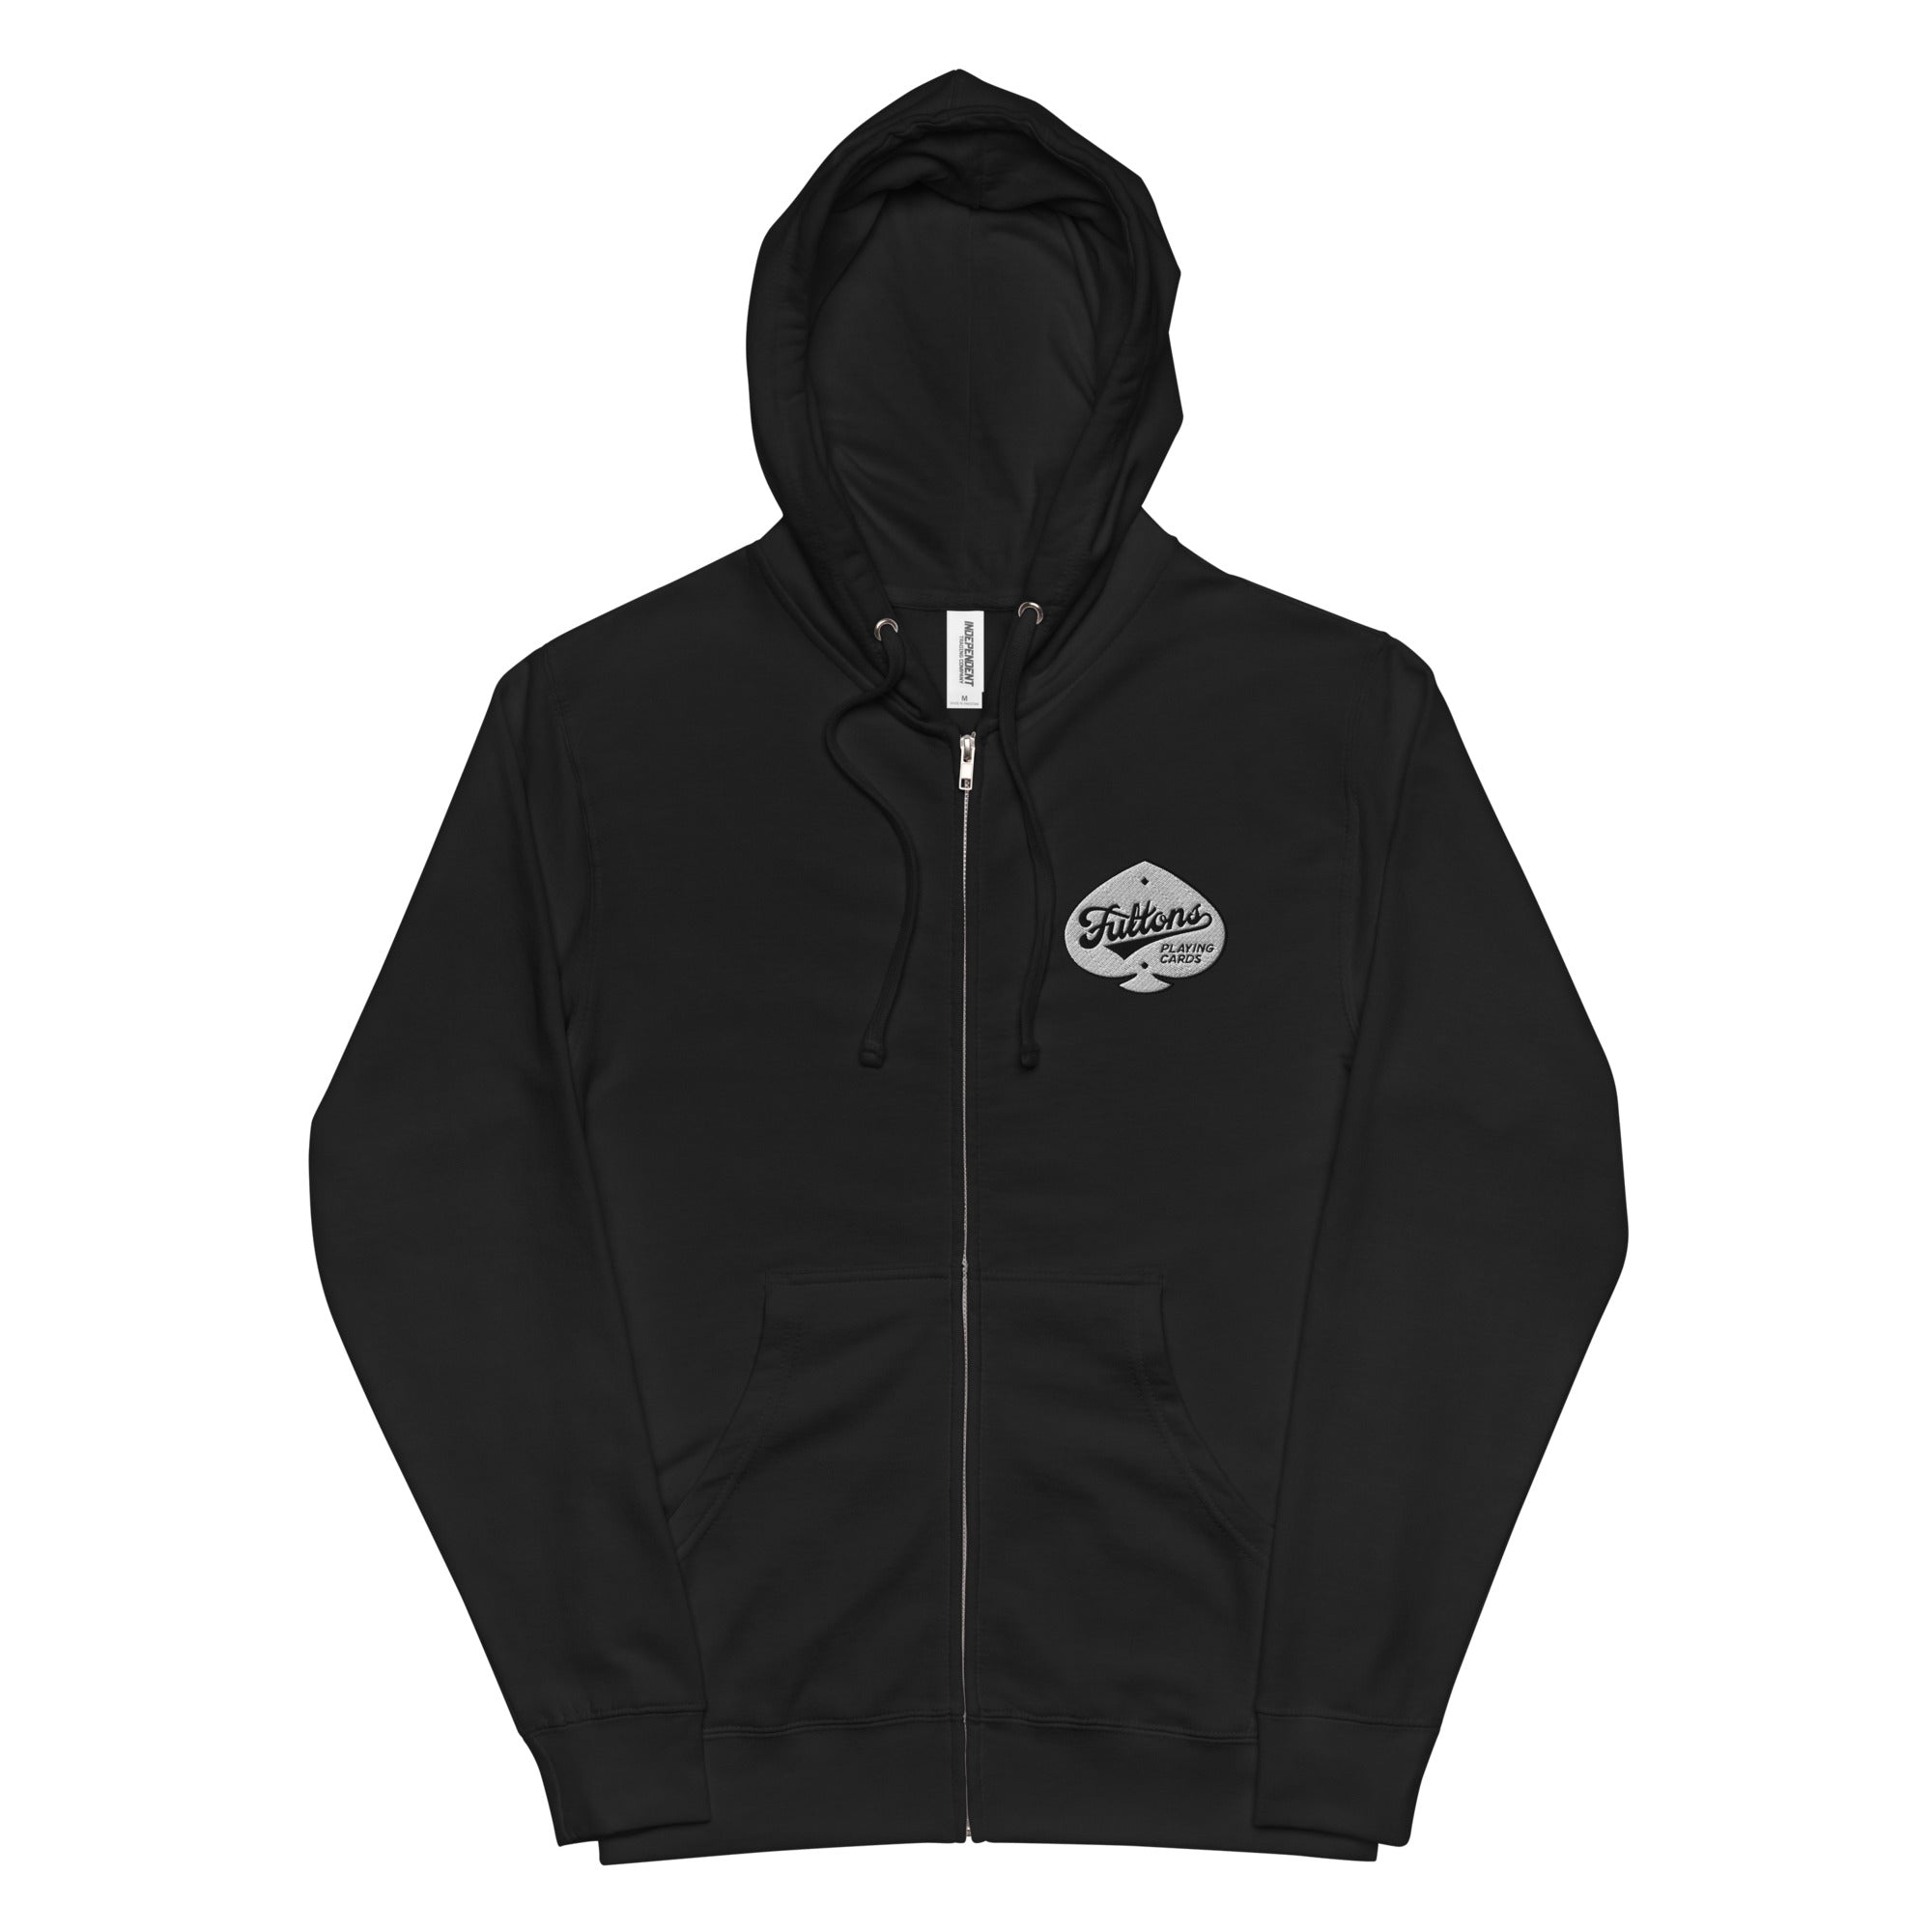 Fulton's Playing Cards Embroidered Zip Up Hoodie